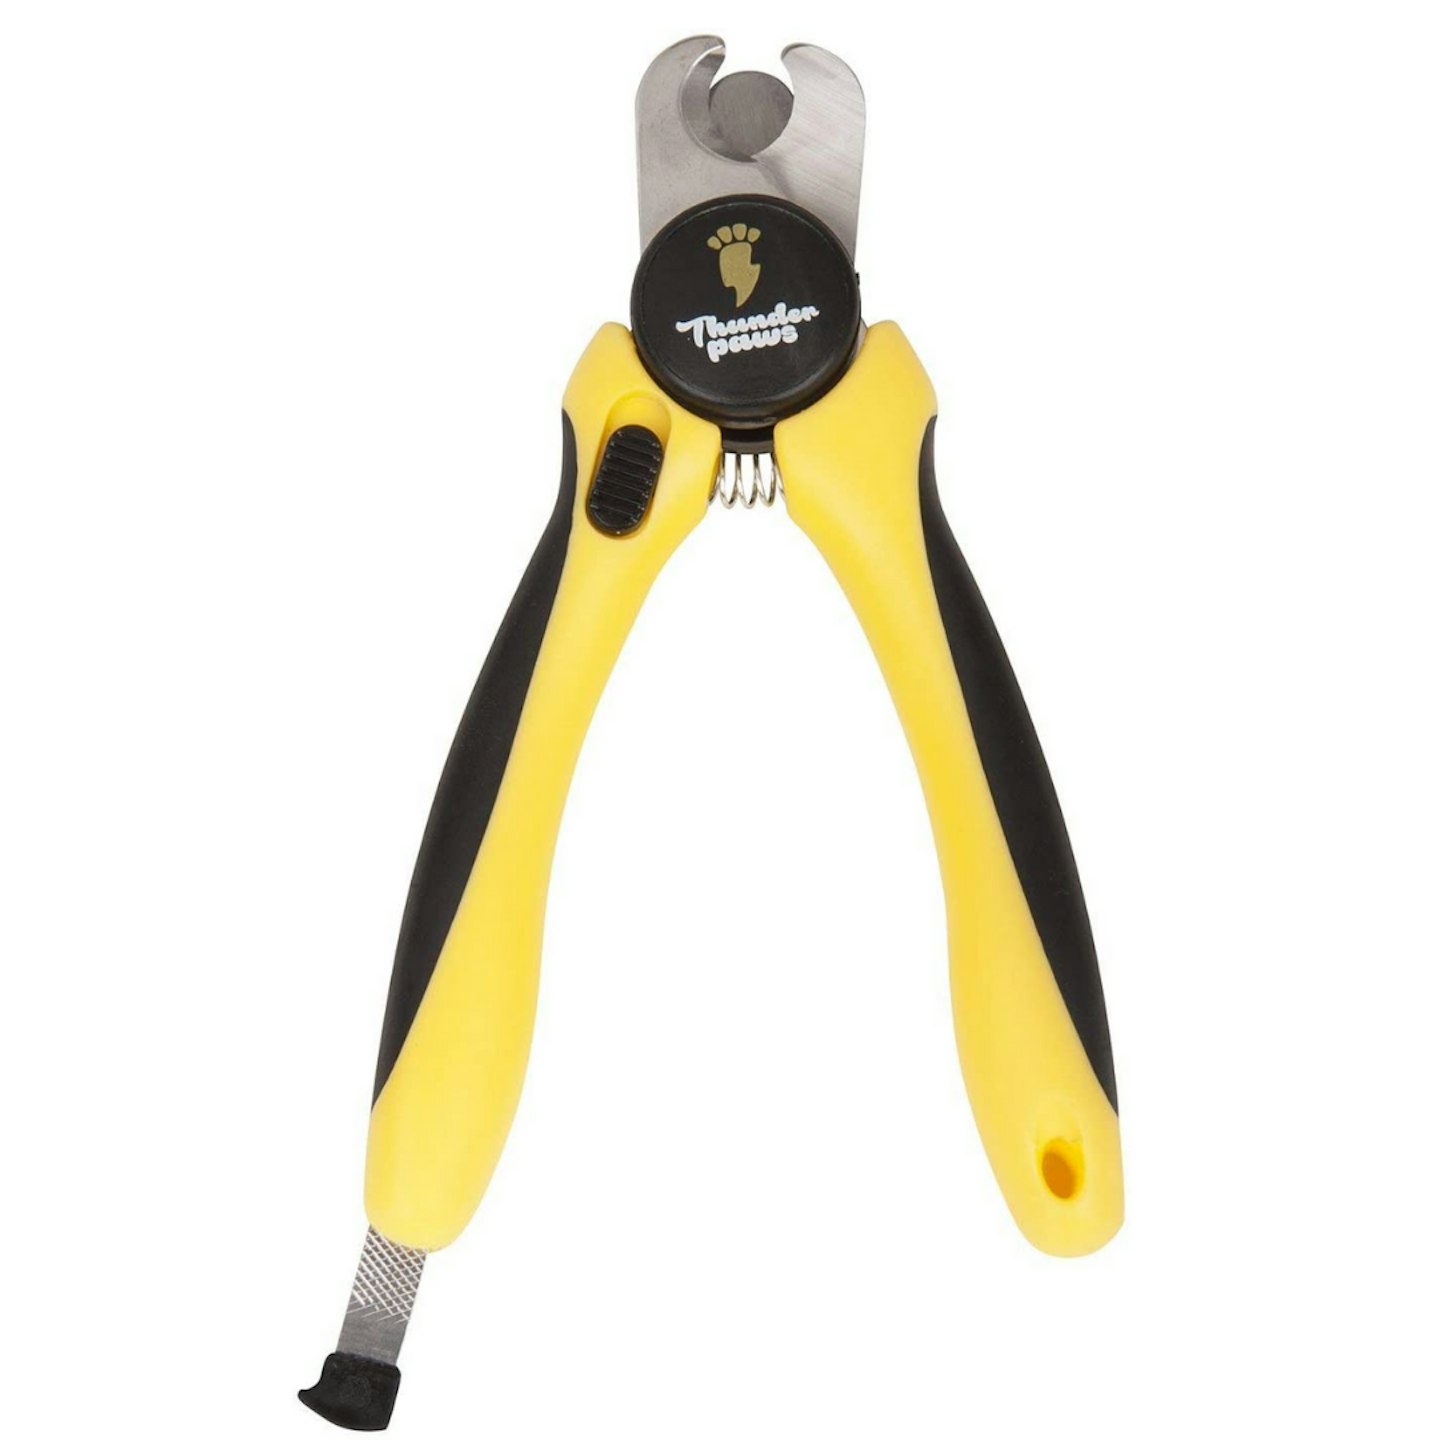 Professional-Grade Dog Nail Clippers by Thunderpaws